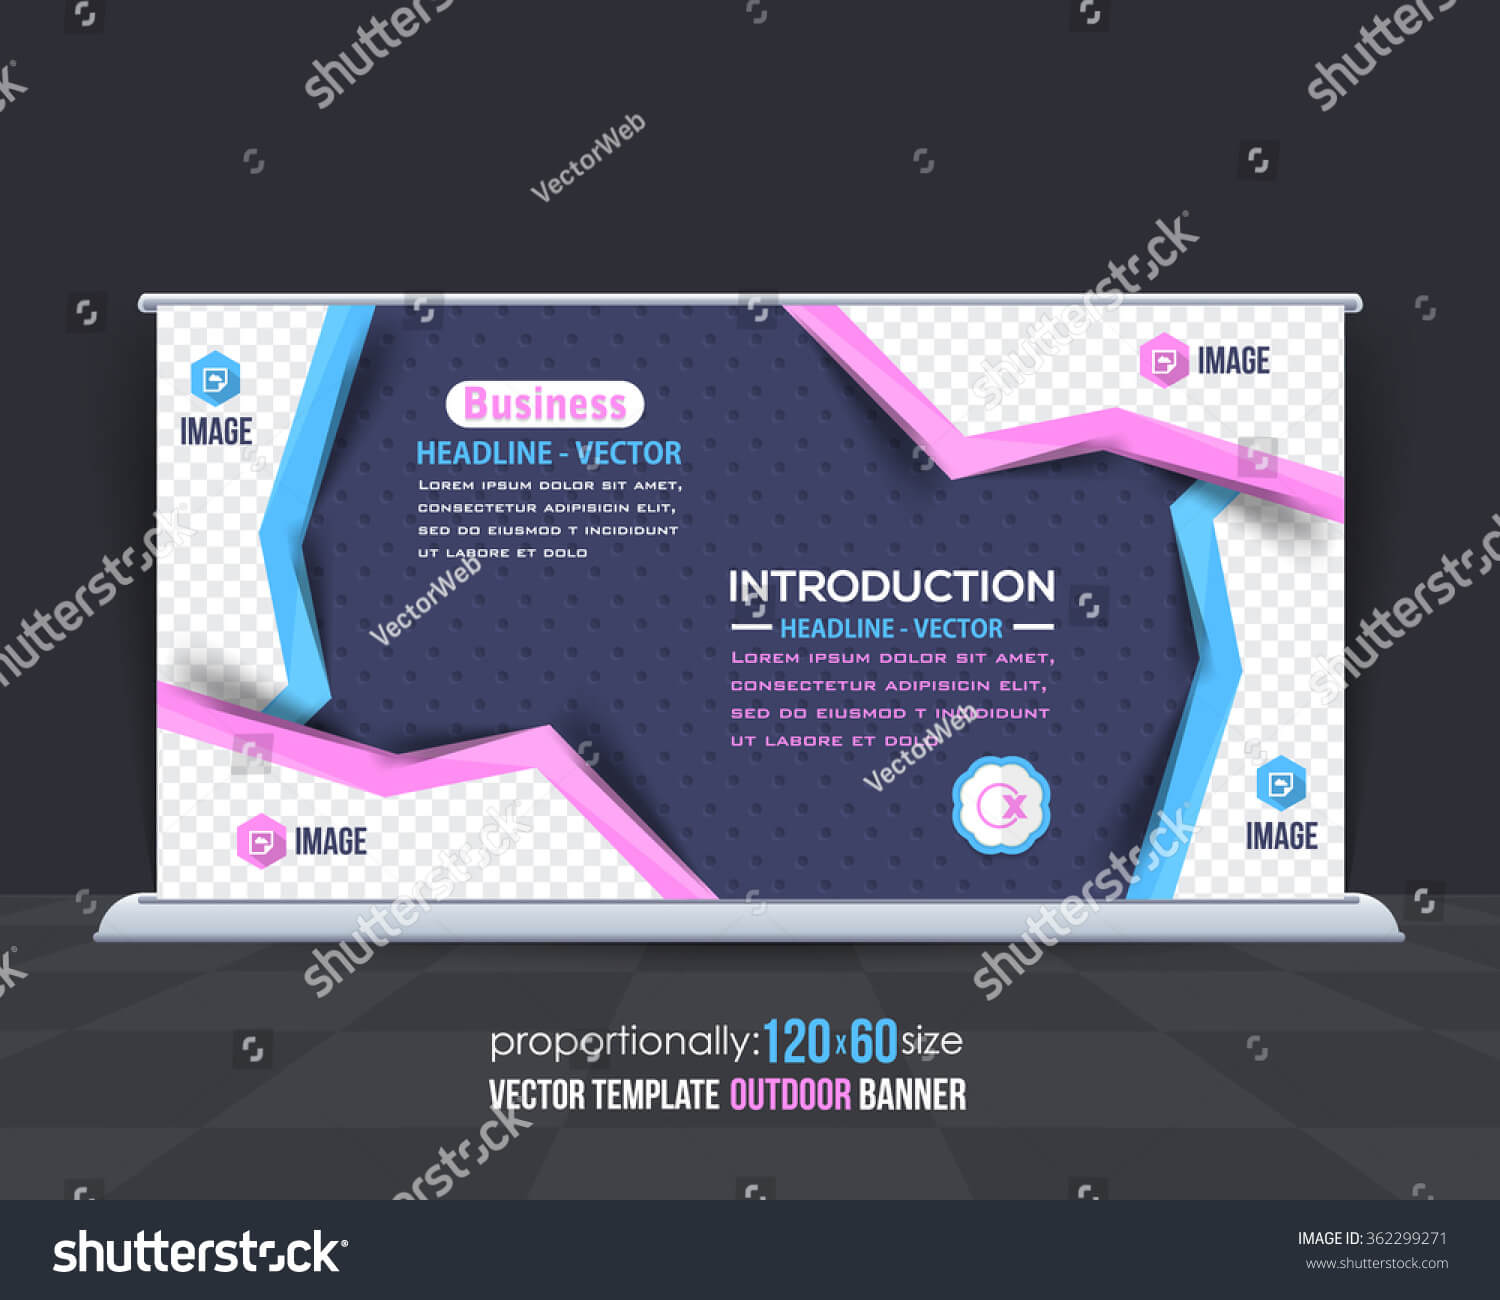 Multicolored Business Theme Outdoor Banner Design Stock Pertaining To Outdoor Banner Design Templates